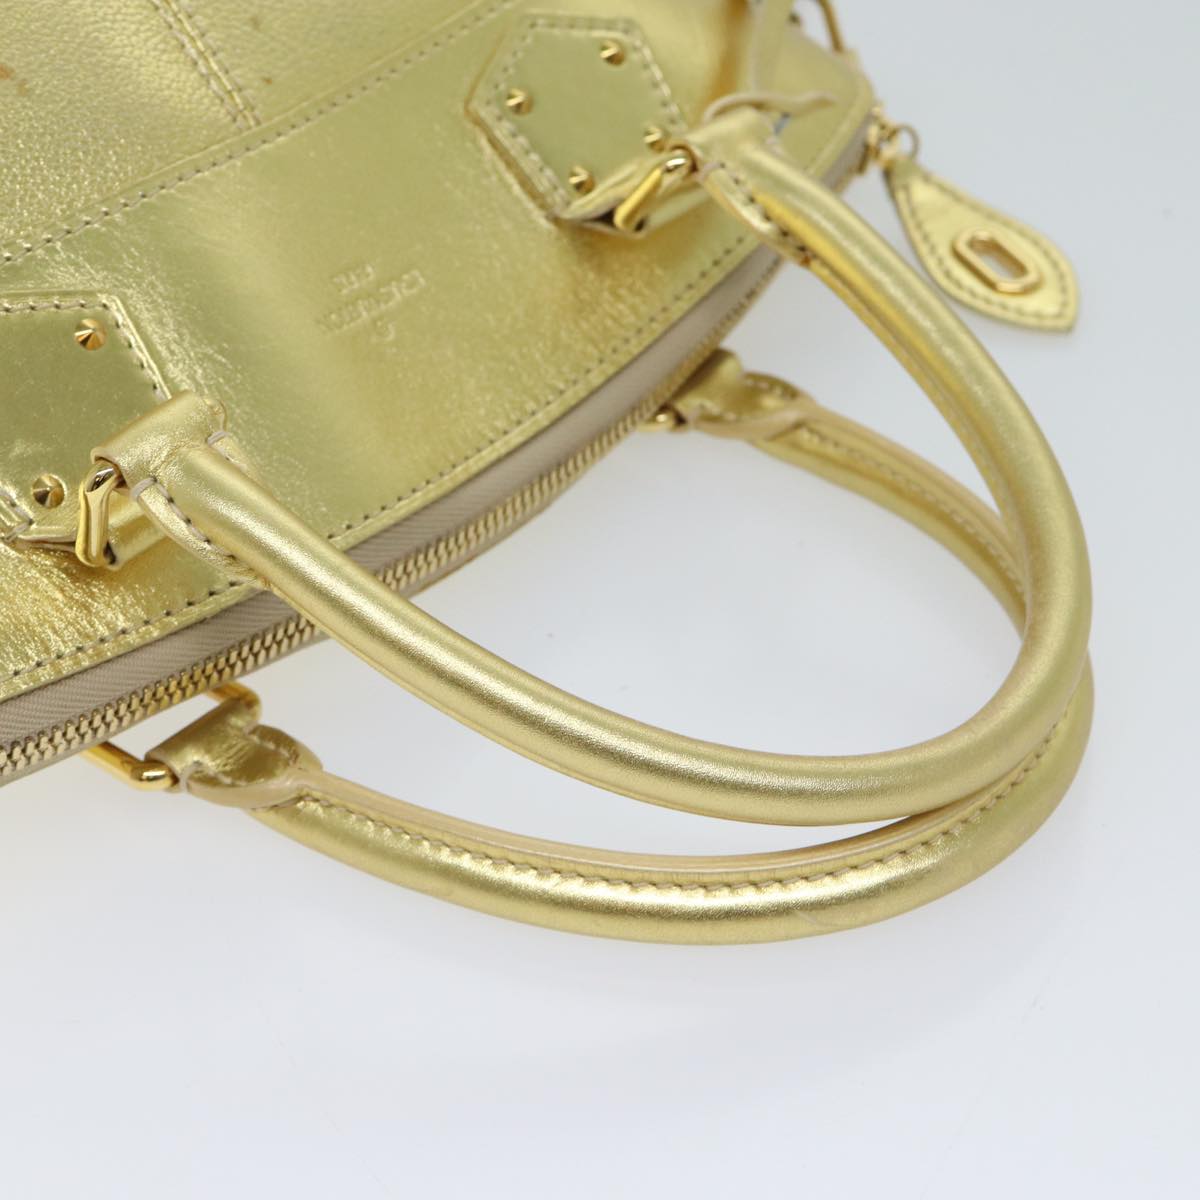 LOUIS VUITTON Suhari Lockit PM Hand Bag Leather Gold All M95433 LV Auth 71447